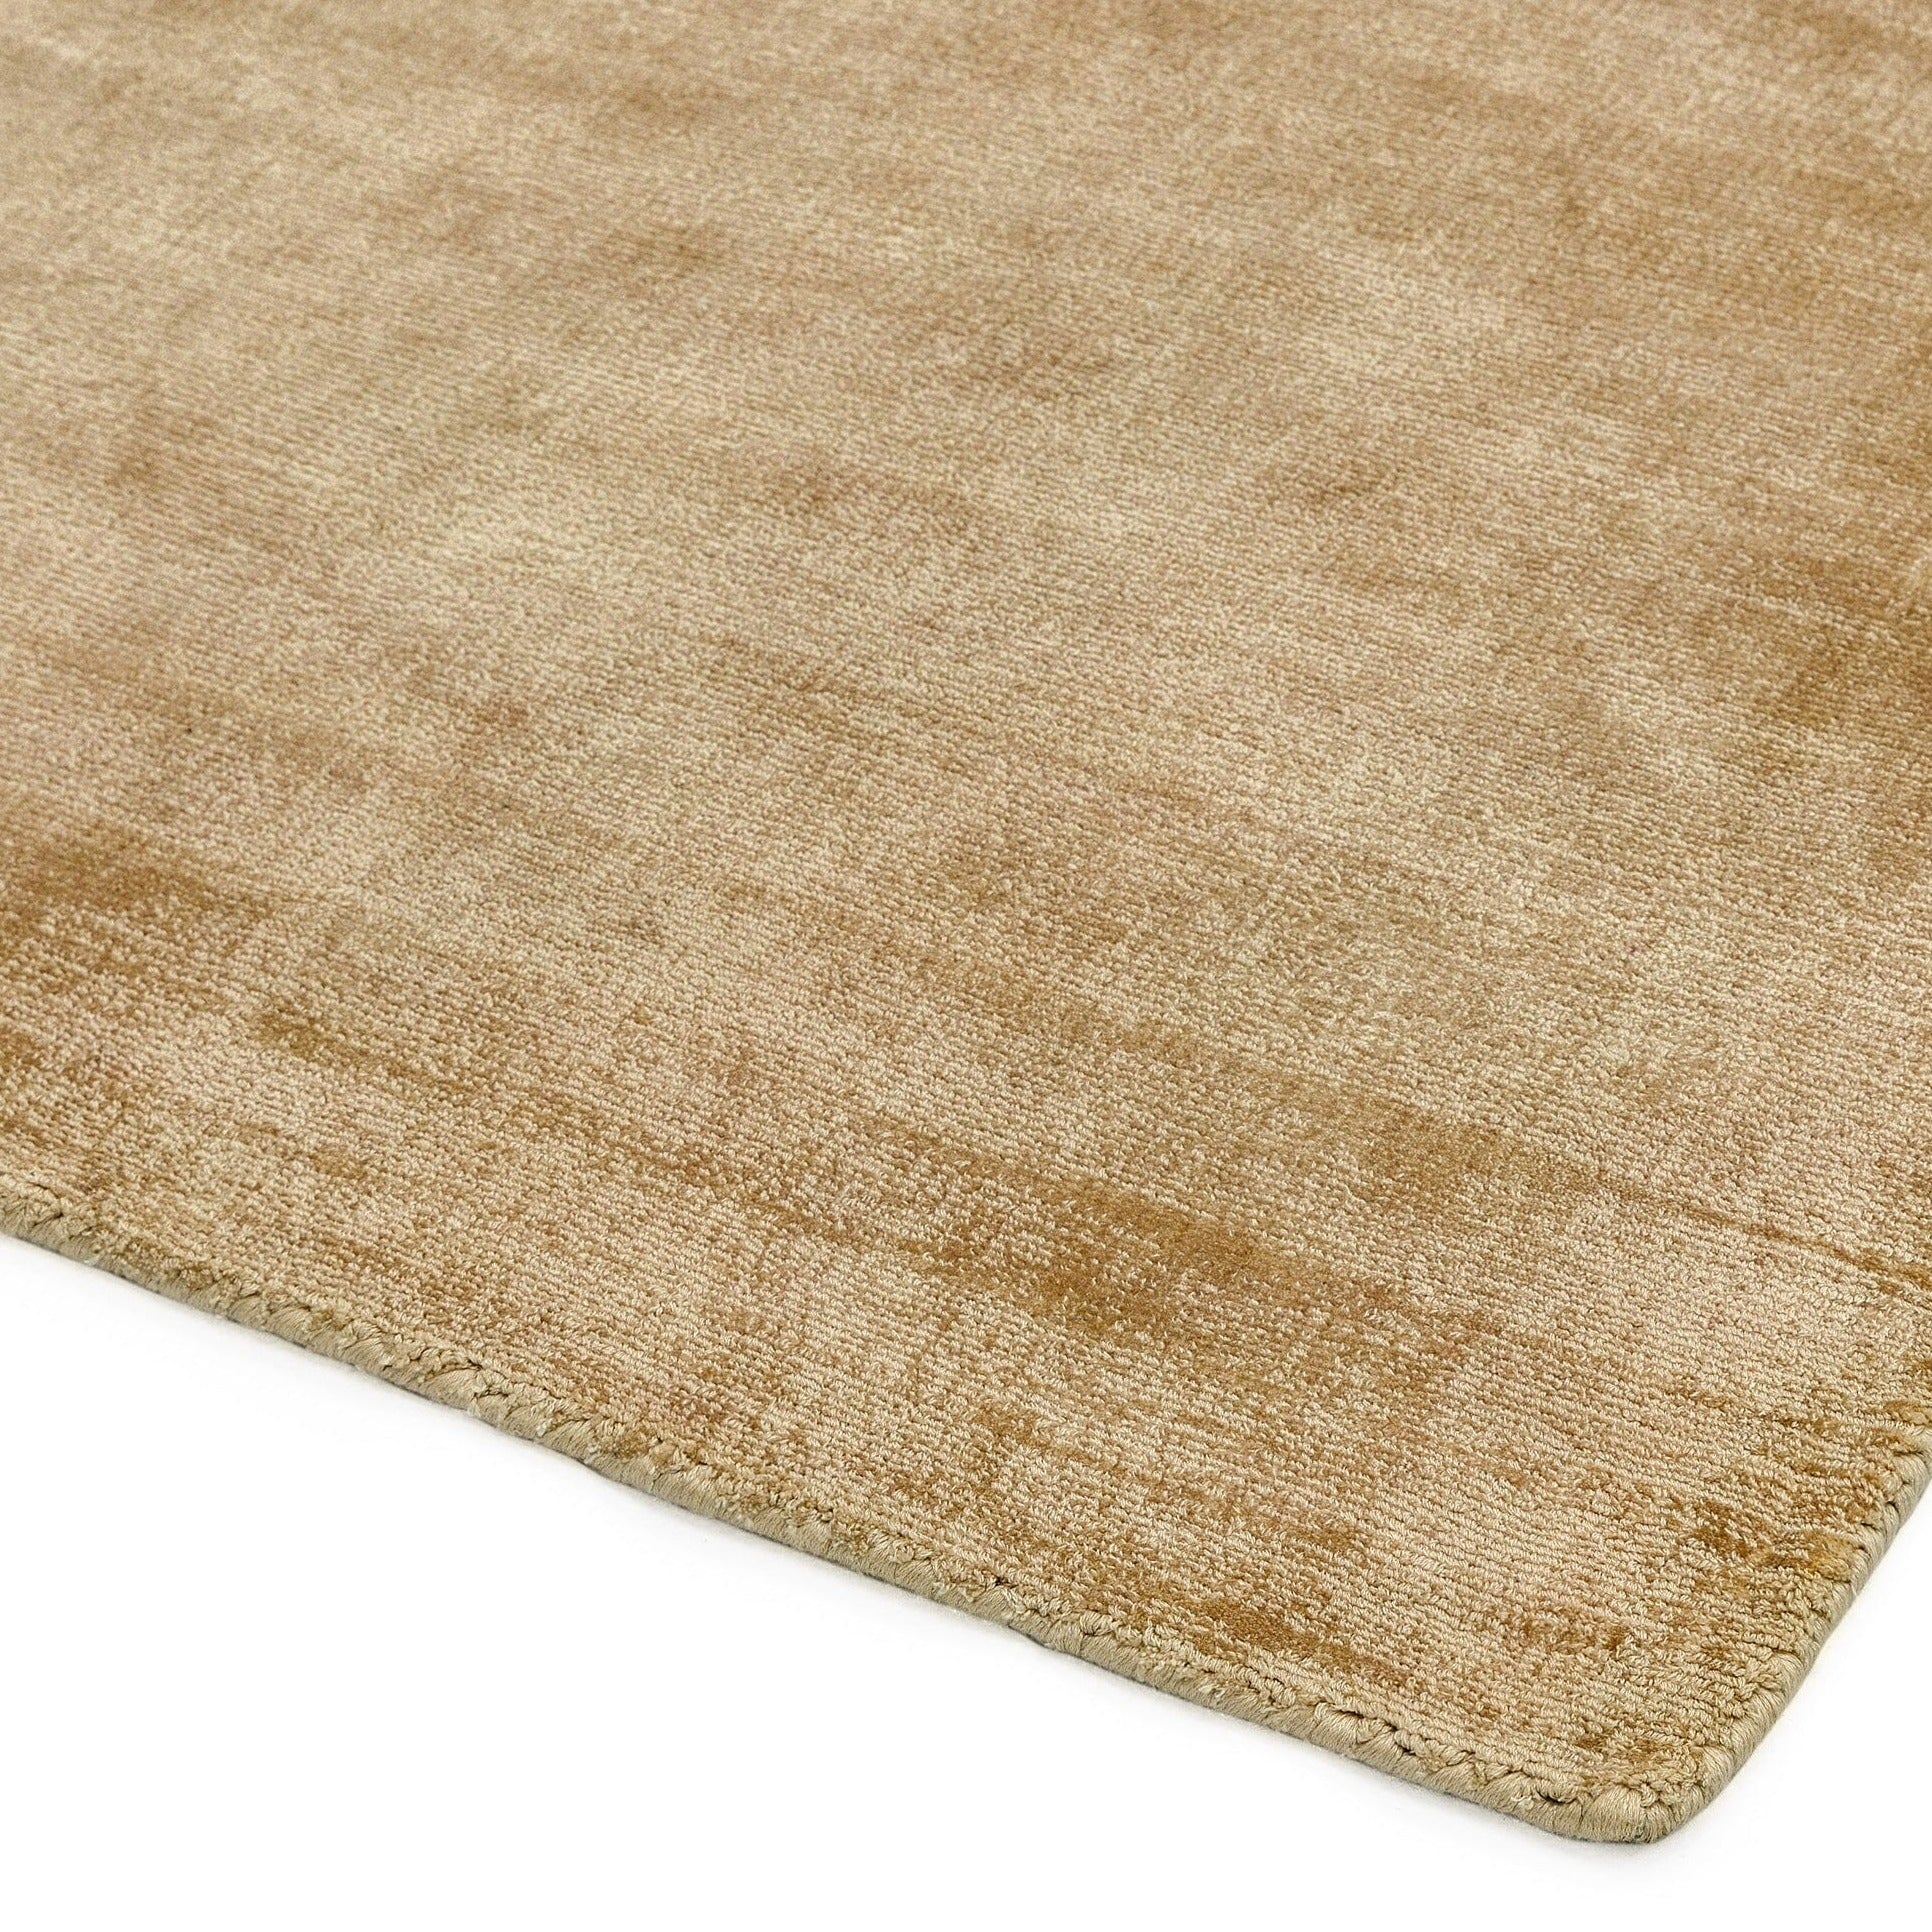 Asiatic Carpets Blade Hand Woven Rug Soft Gold - 120 x 170cm